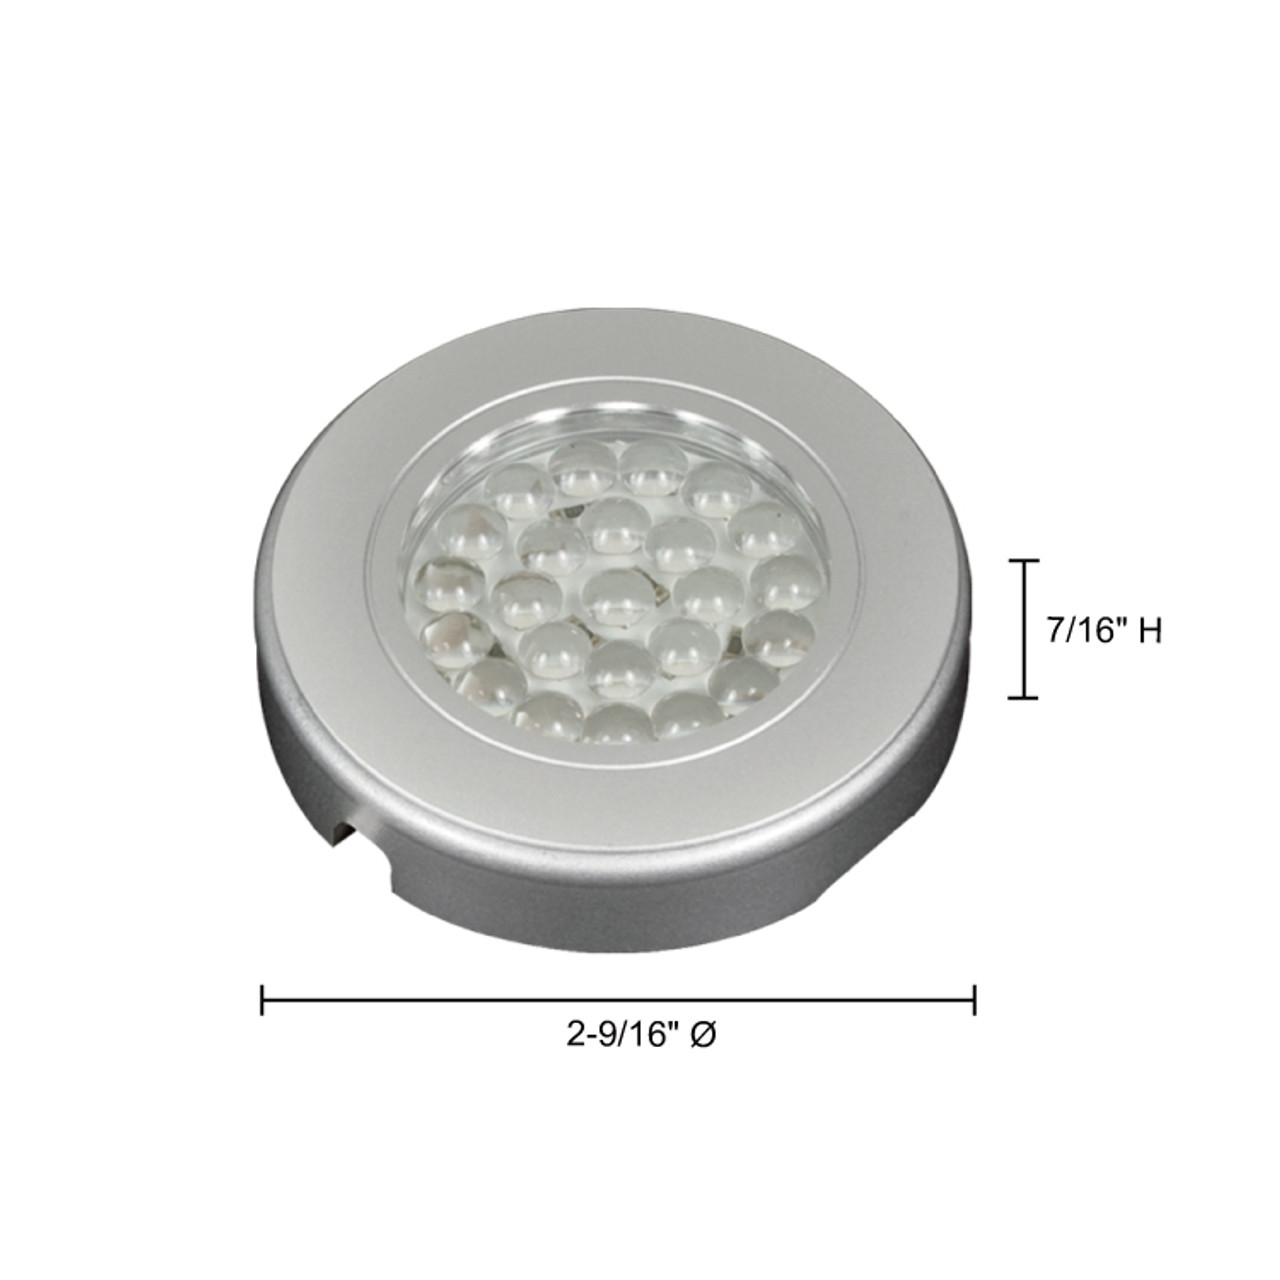 JESCO Lighting SD123CV4550-S 1.65W LED Orionis Recessed or Surface Mount, 5000K, Silver